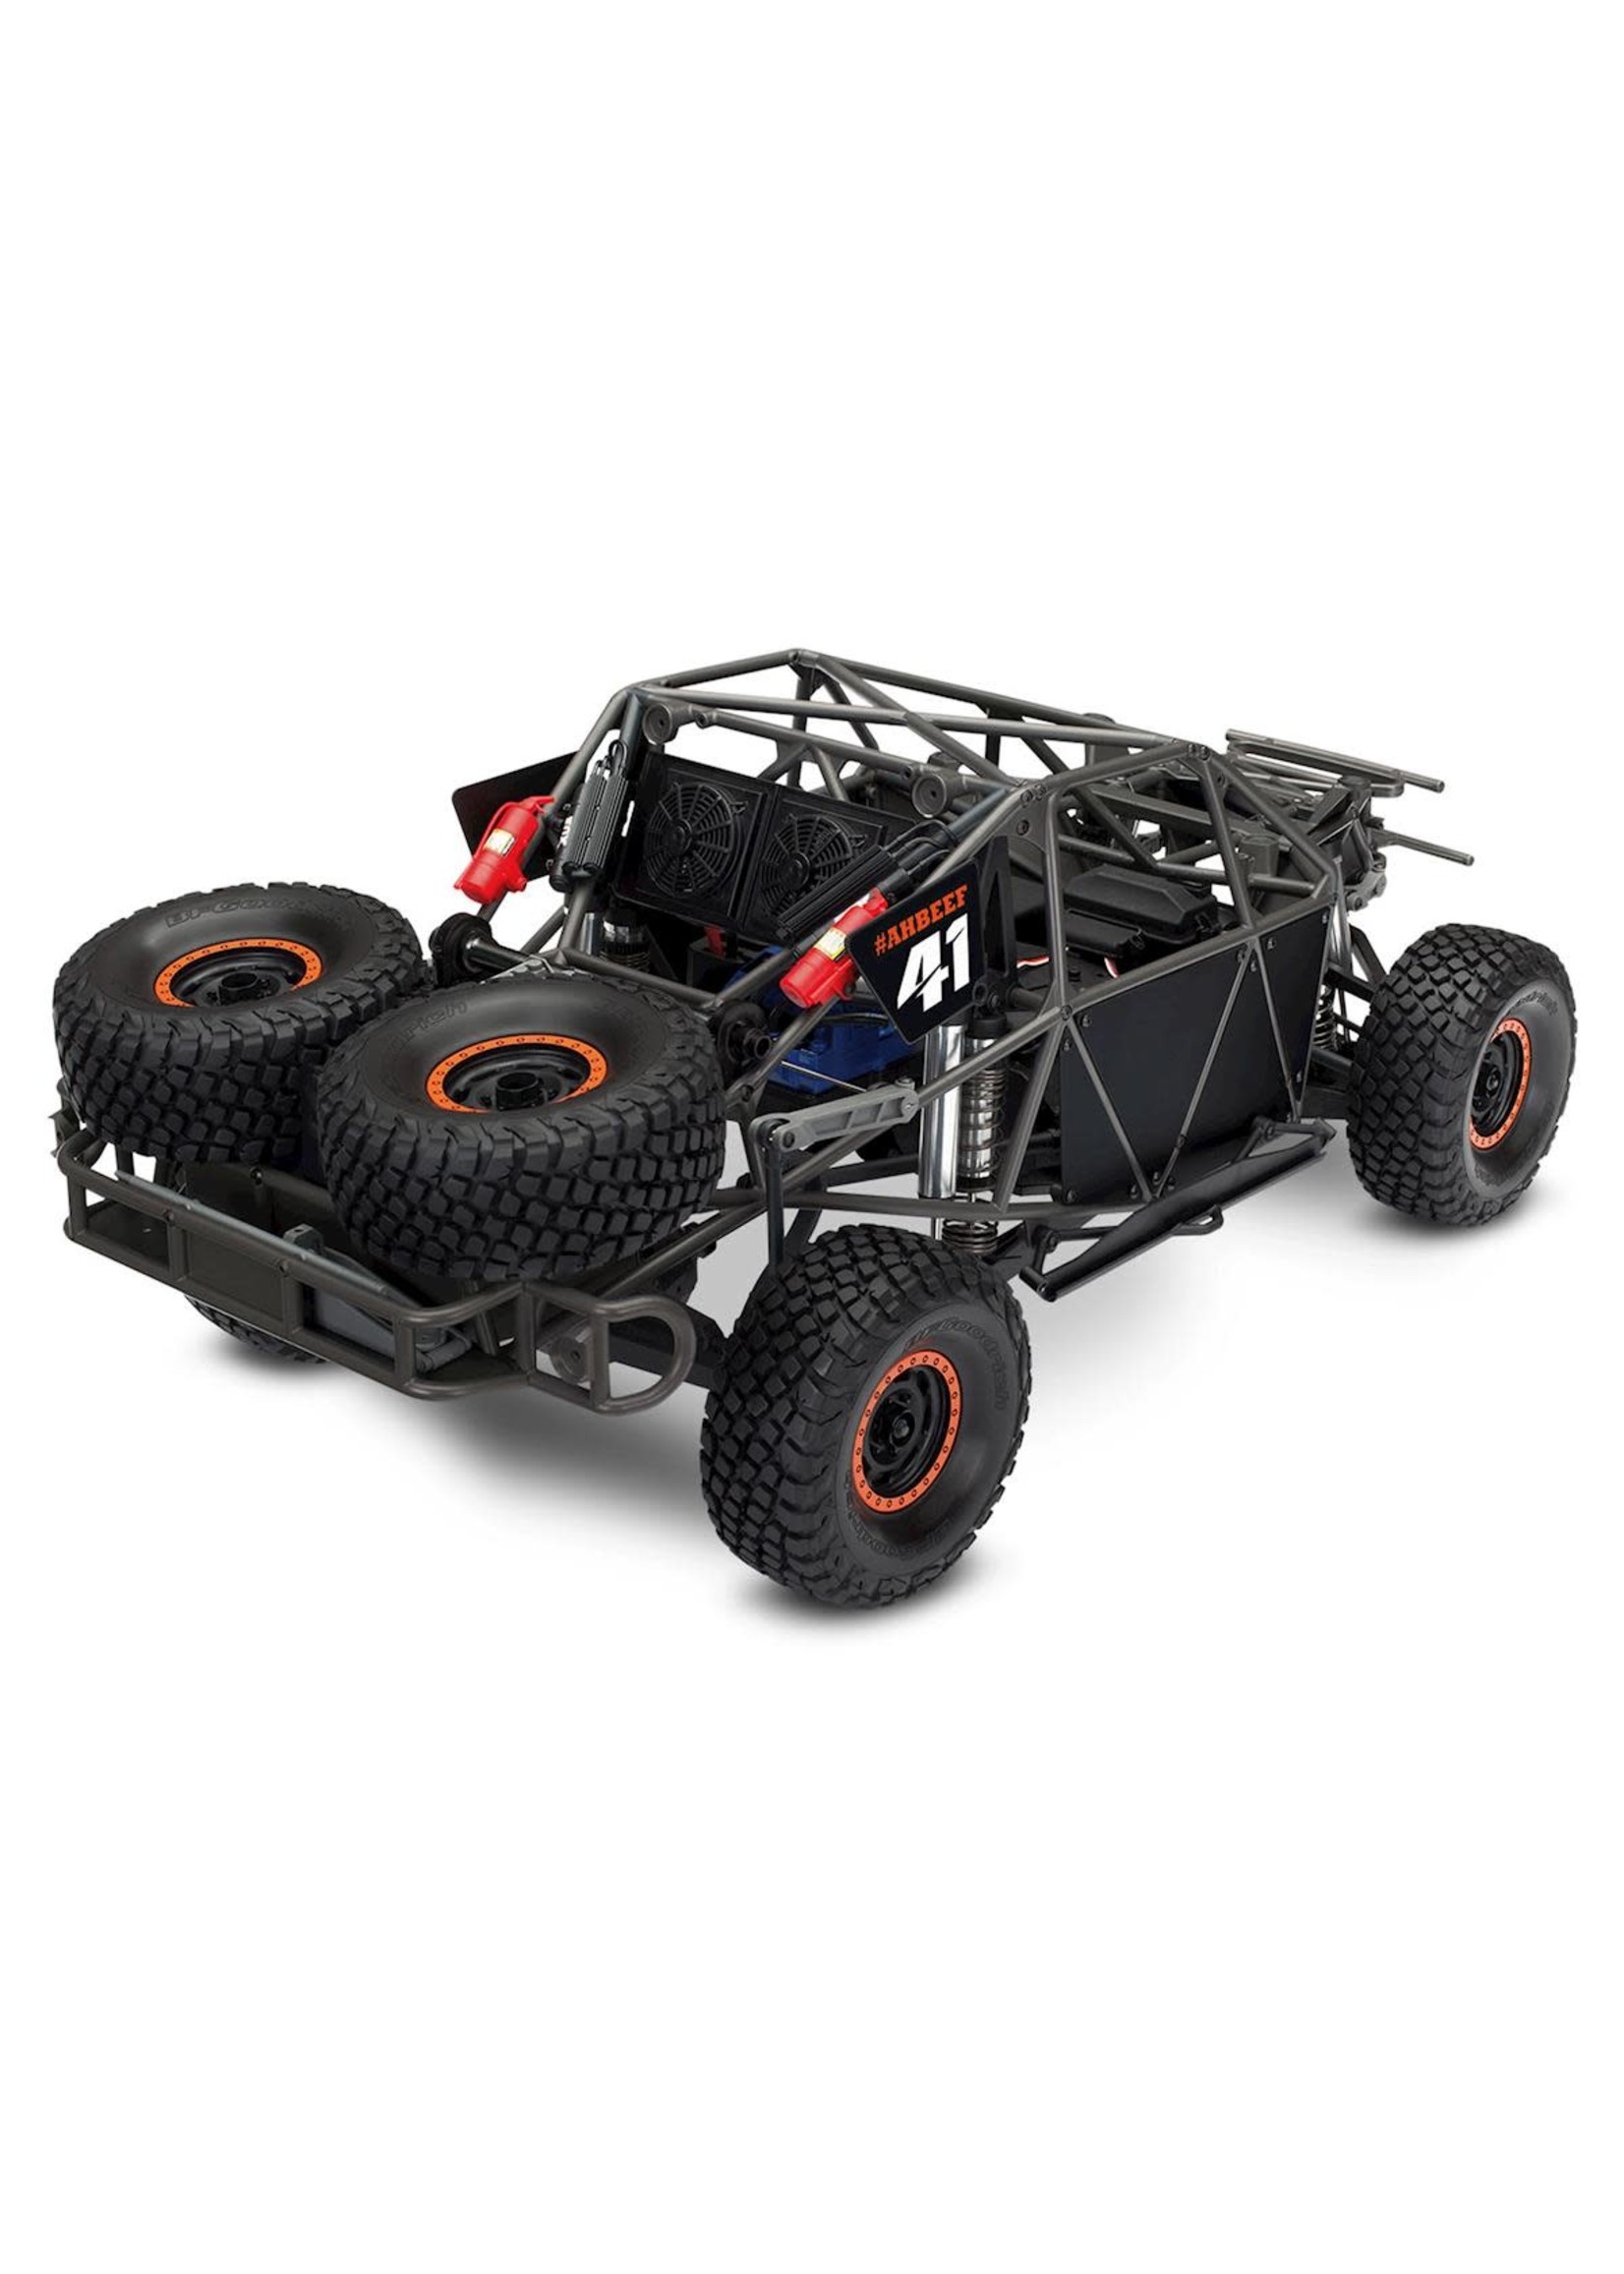 Traxxas 85086-4-TRX Unlimited Desert Racer : 4WD Electric Race Truck with TQi Traxxas Link  Enabled 2.4GHz Radio System and Traxxas Stability Management (TSM)